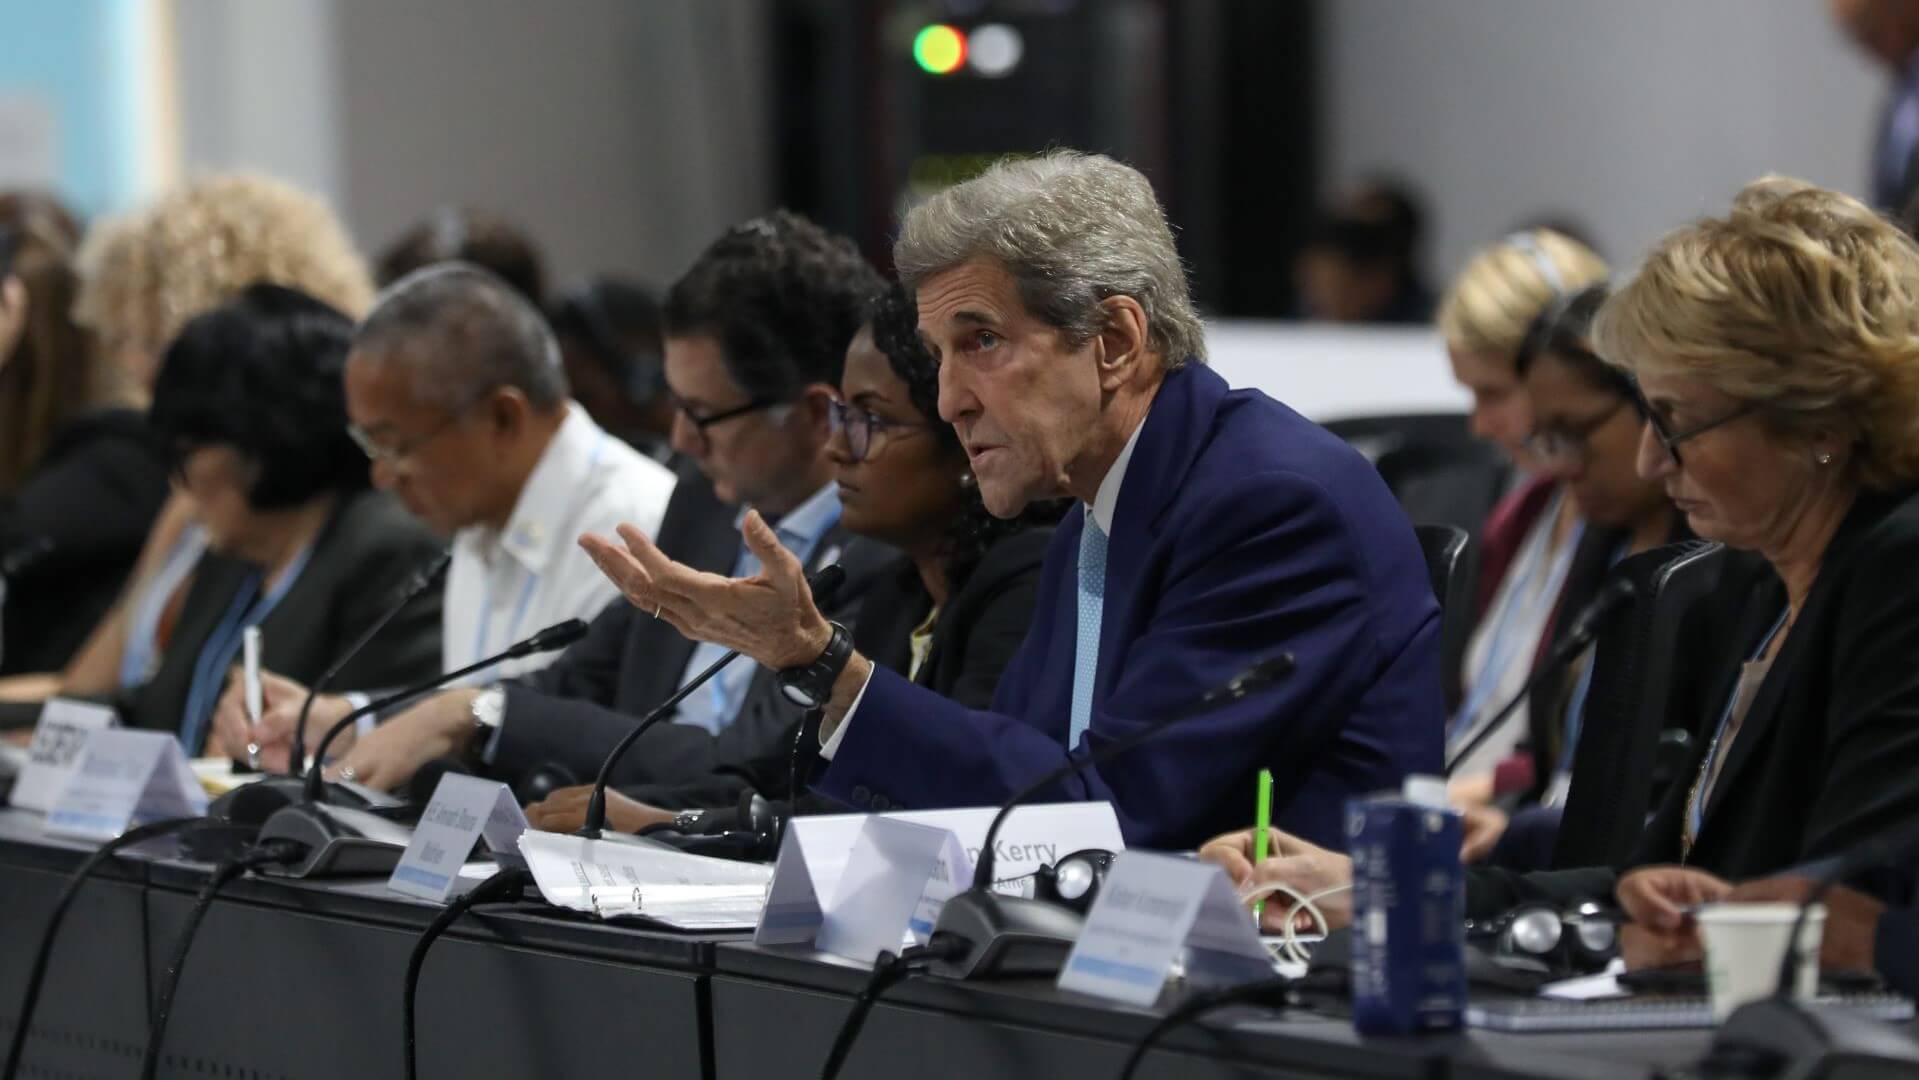 John Kerry seated in row of delegates during COP27